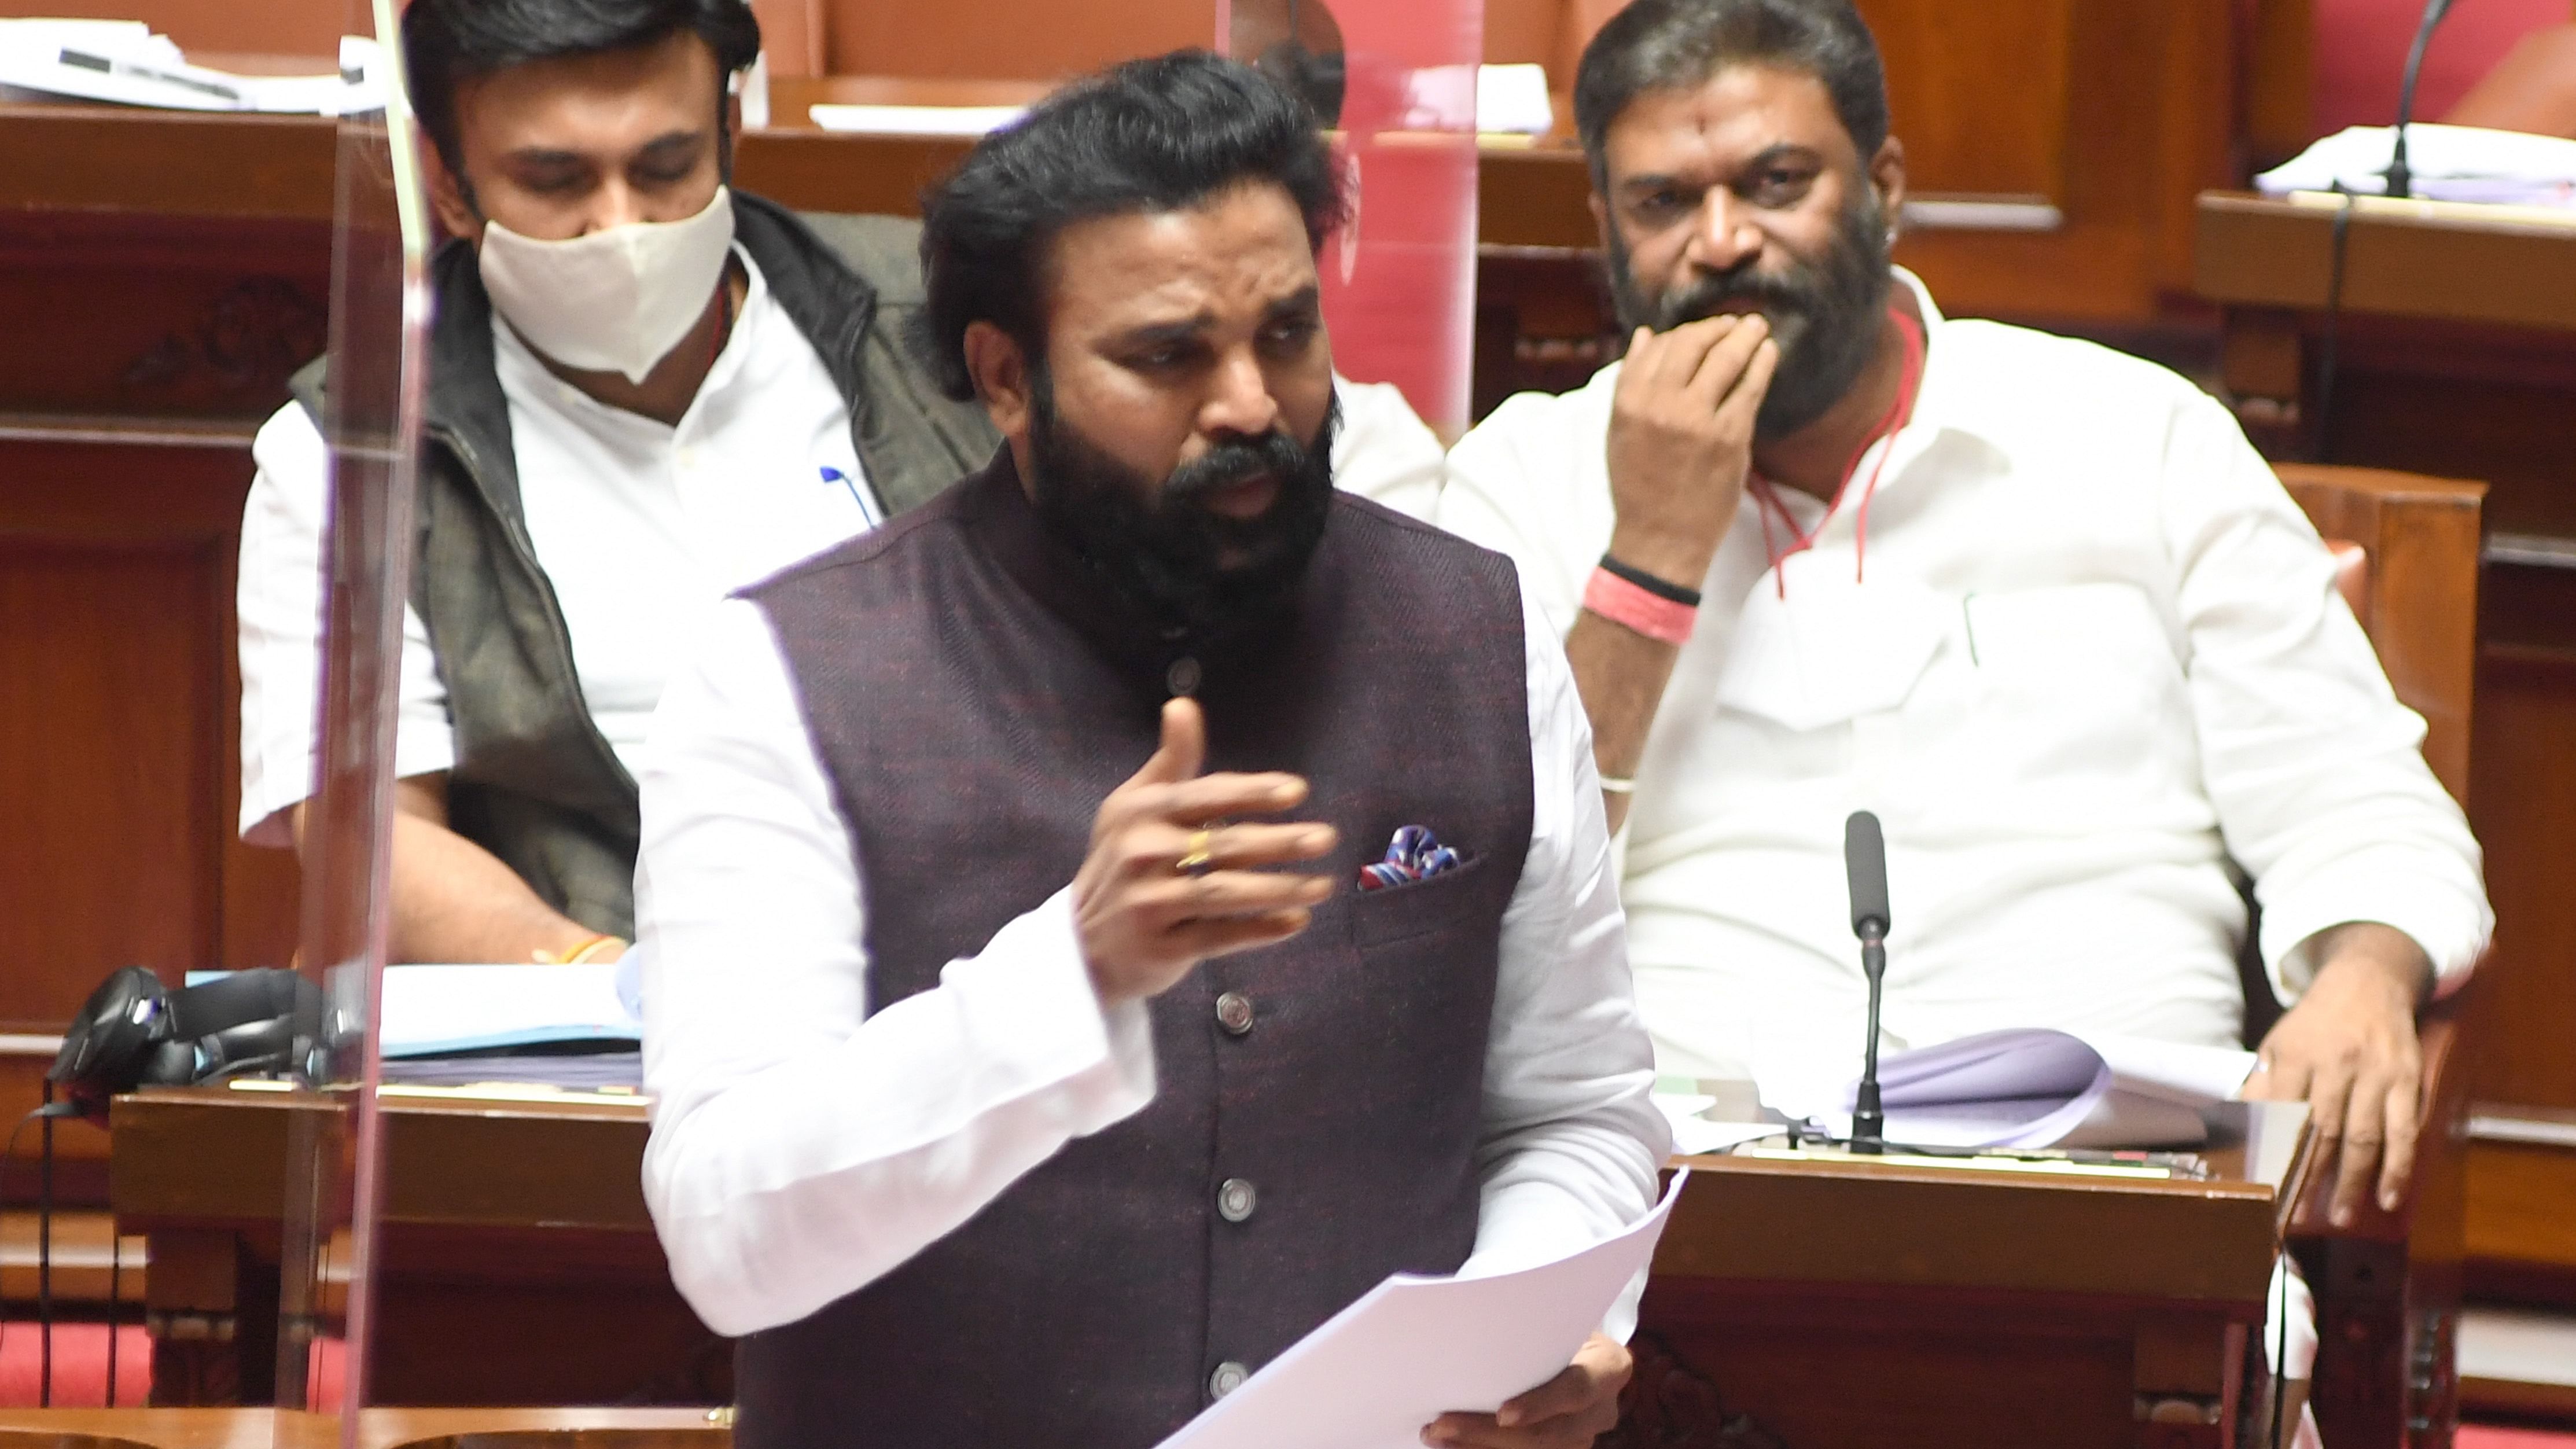 Sriramulu, Social Welfare Minister answering question at the first day of Legislative Council session in Vidhana Soudha, Bengaluru. Credit: DH File Photo/ S K Dinesh